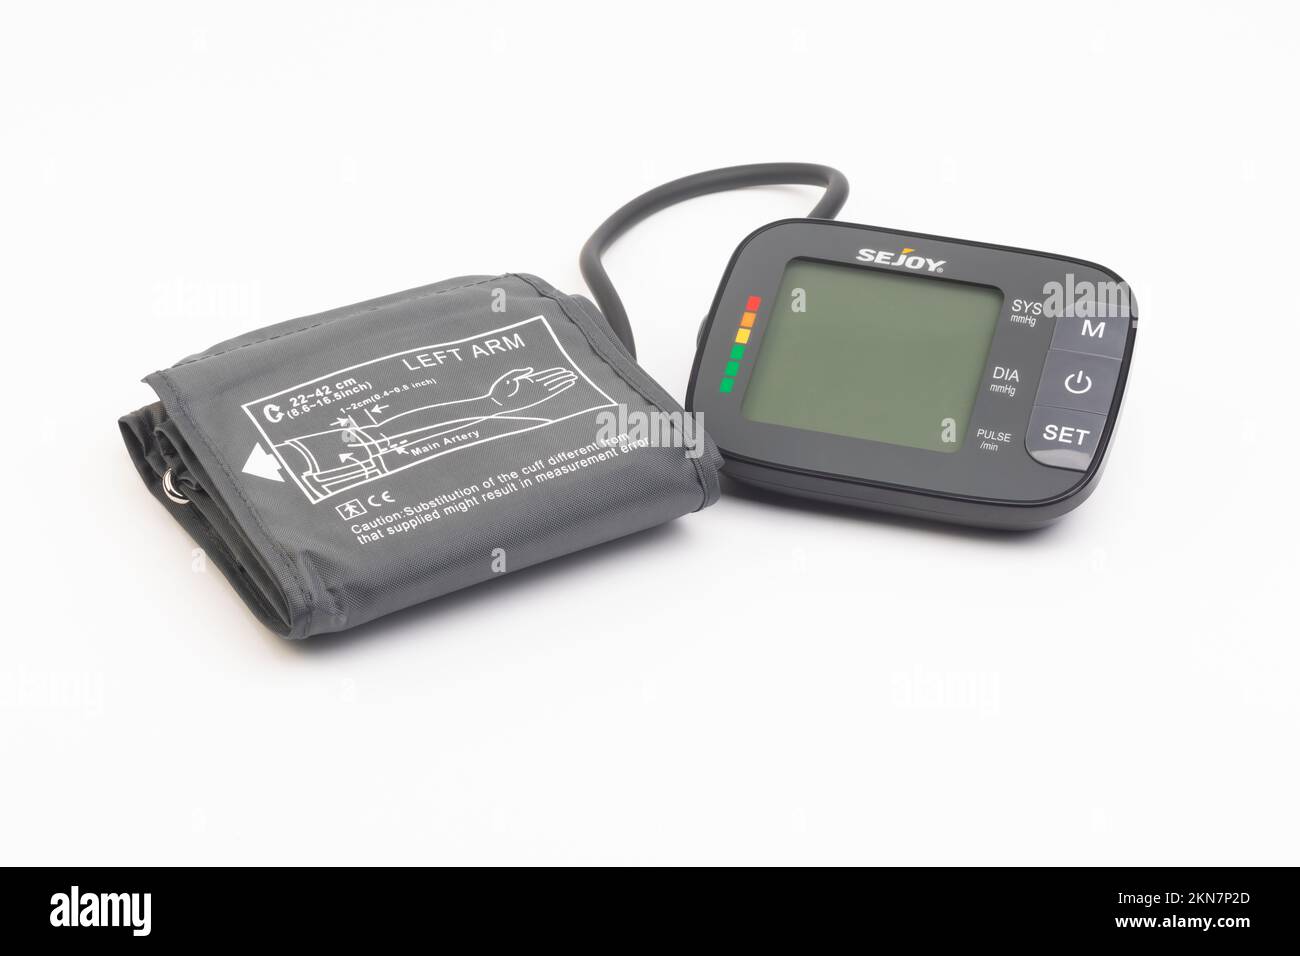 A Joytech Healthcare Sejoy blood pressure monitor and arm cuff Stock Photo